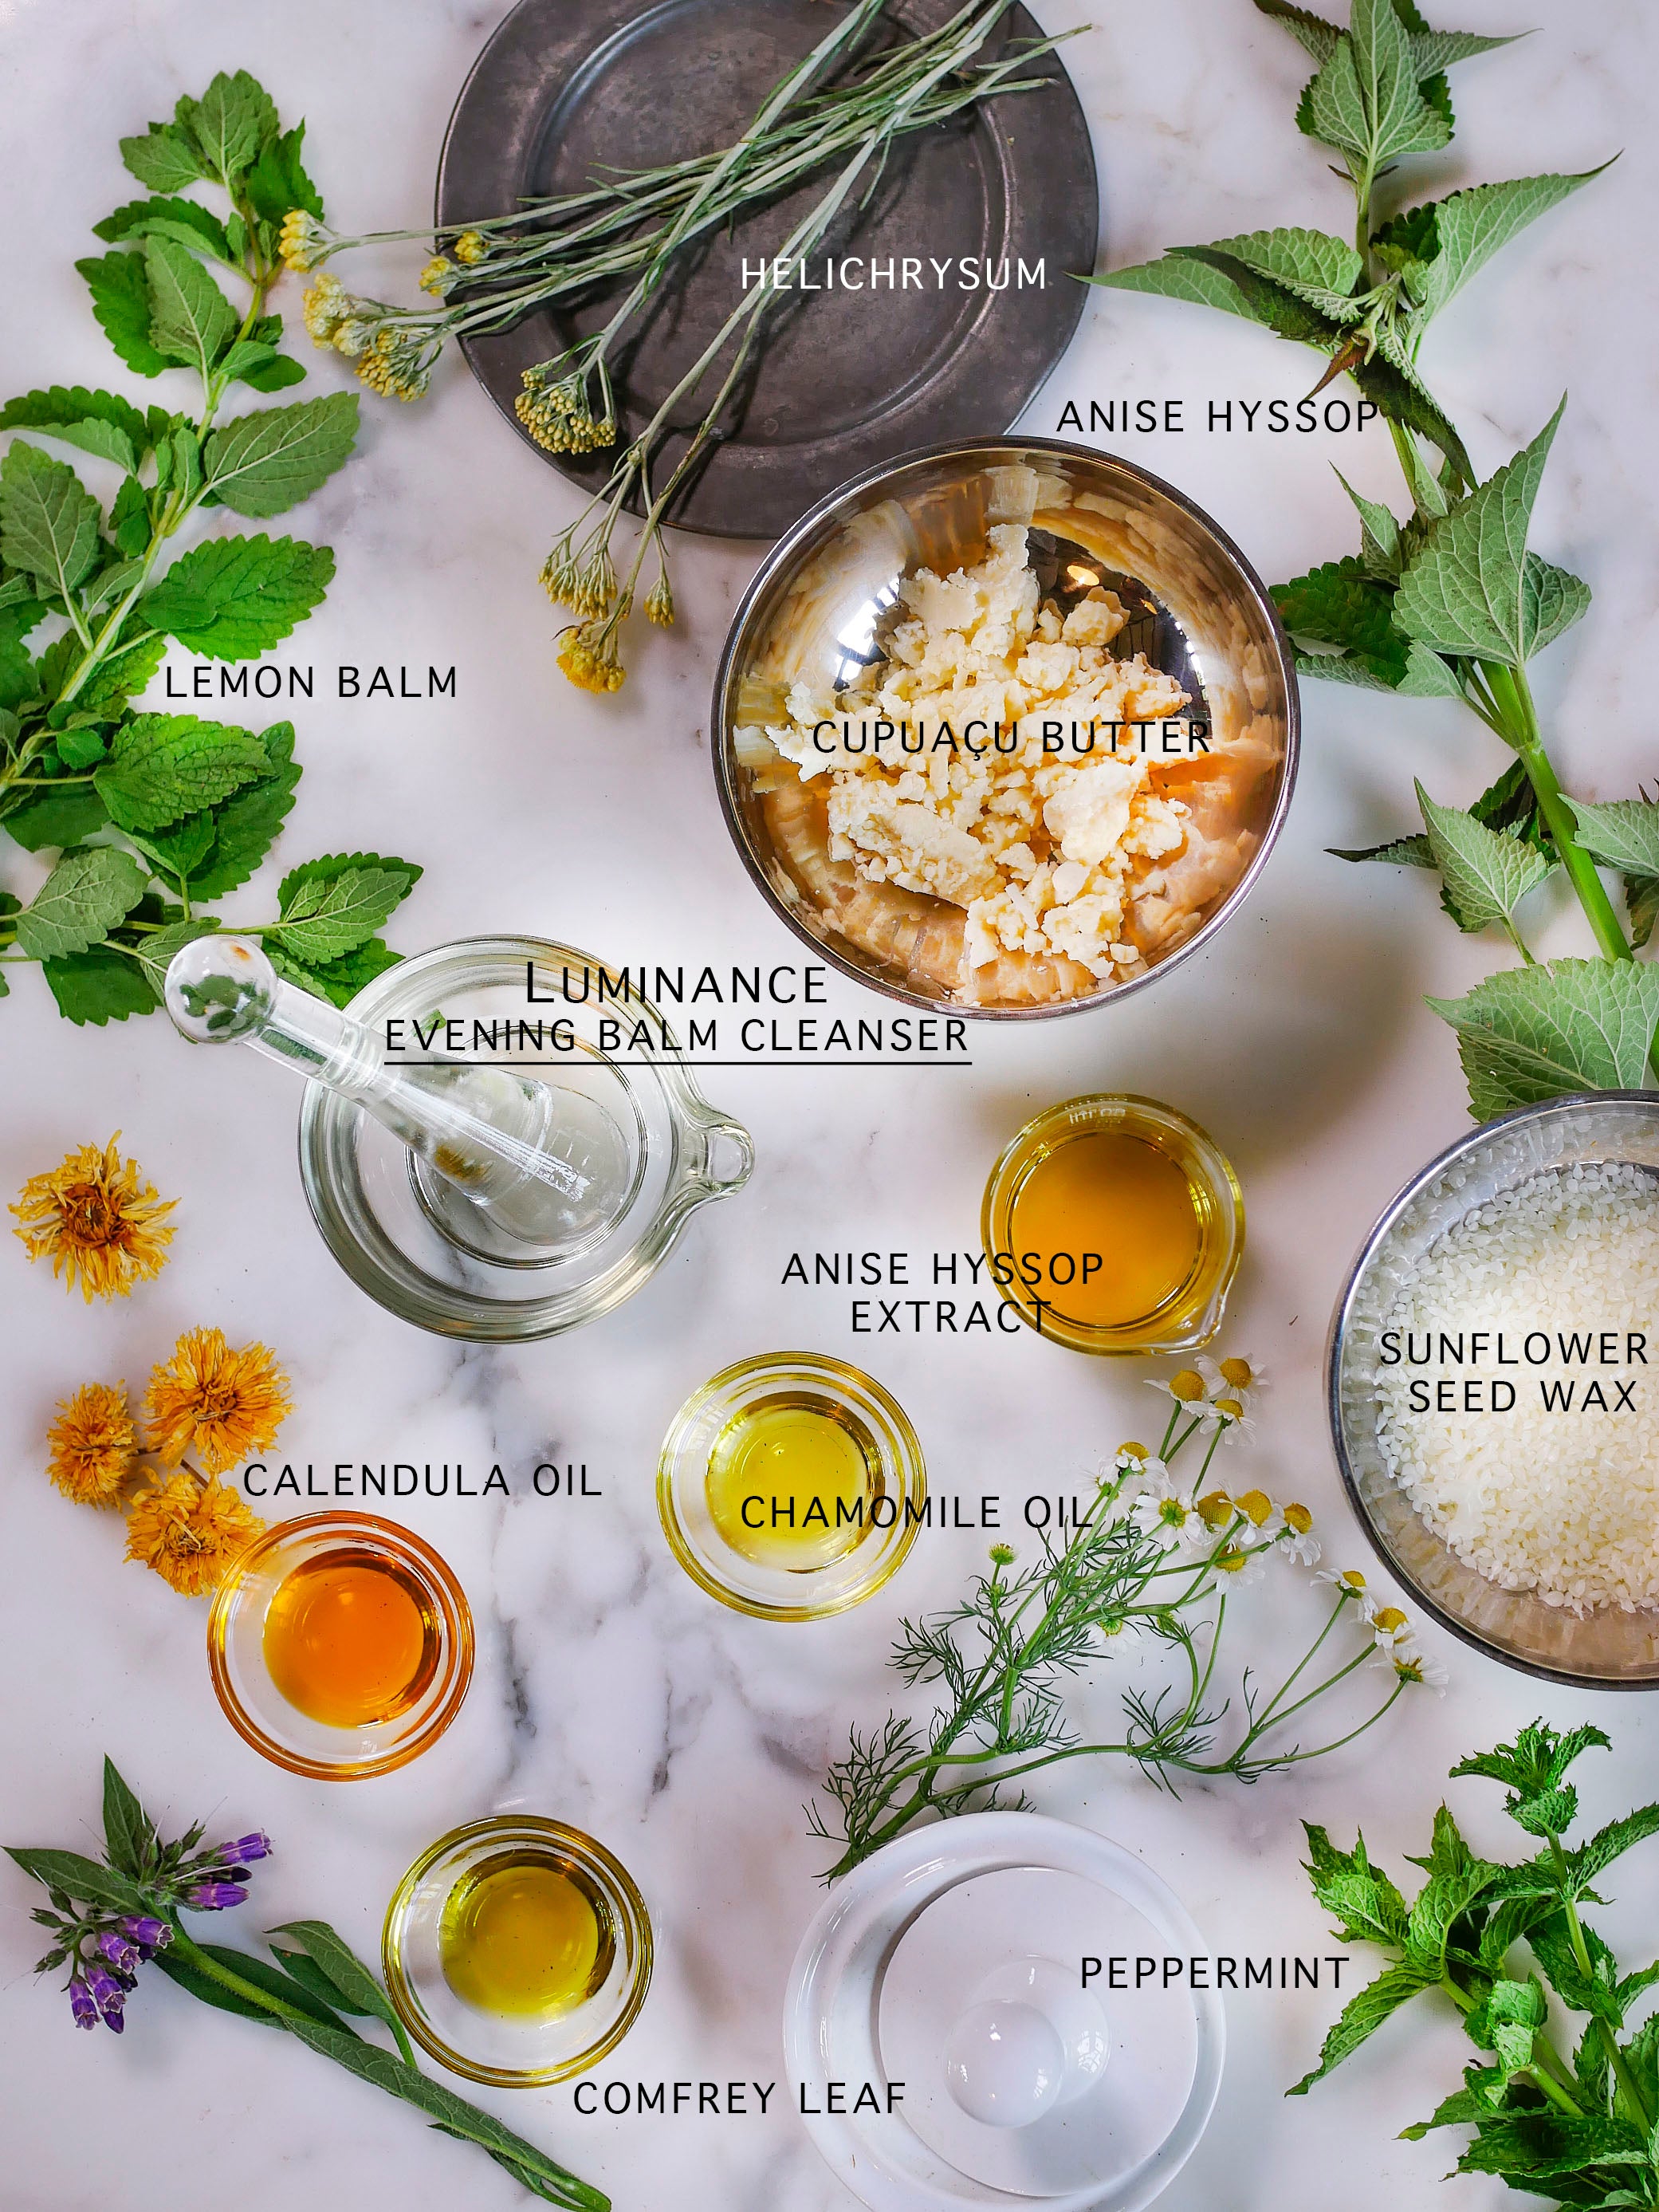 Botanical ingredients of Luminance, a PM balm cleanser.